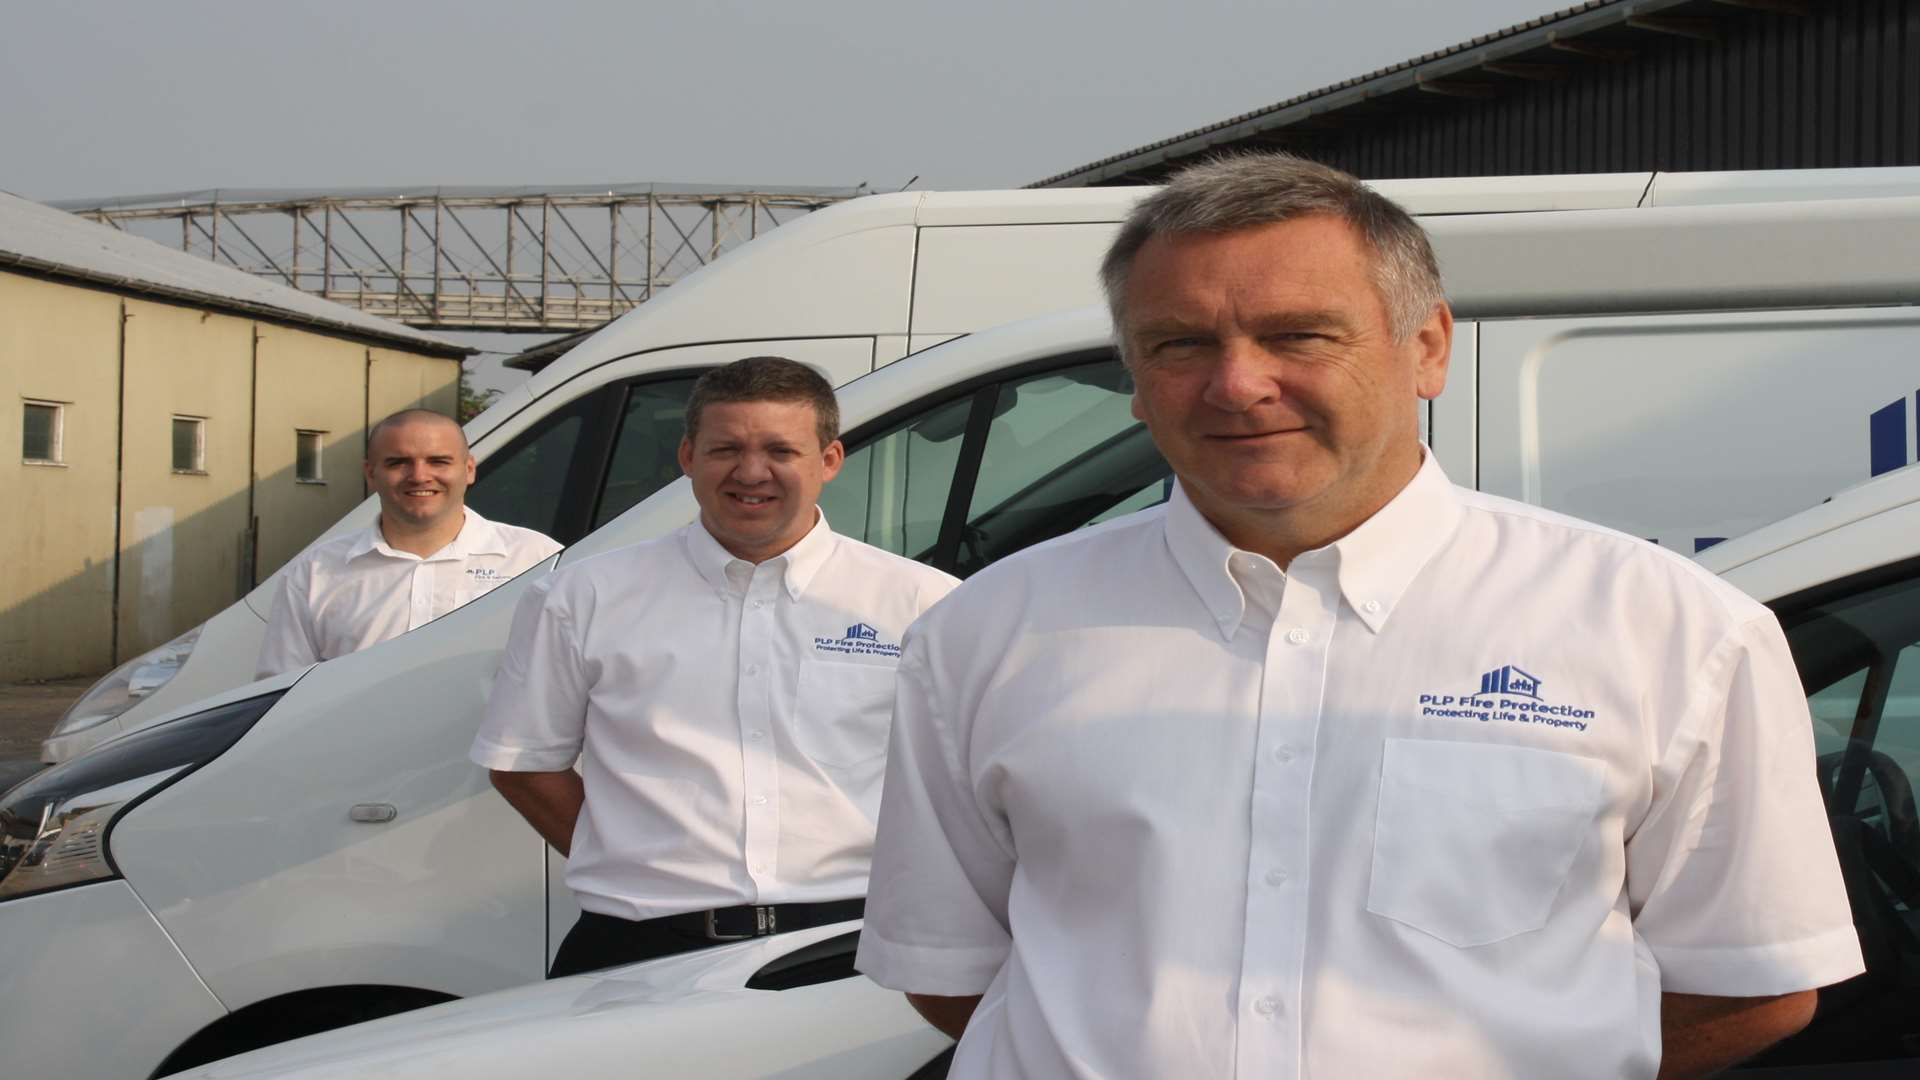 PLP owners l-r Rob Beeching, Paul Bennett and Alan Beeching.